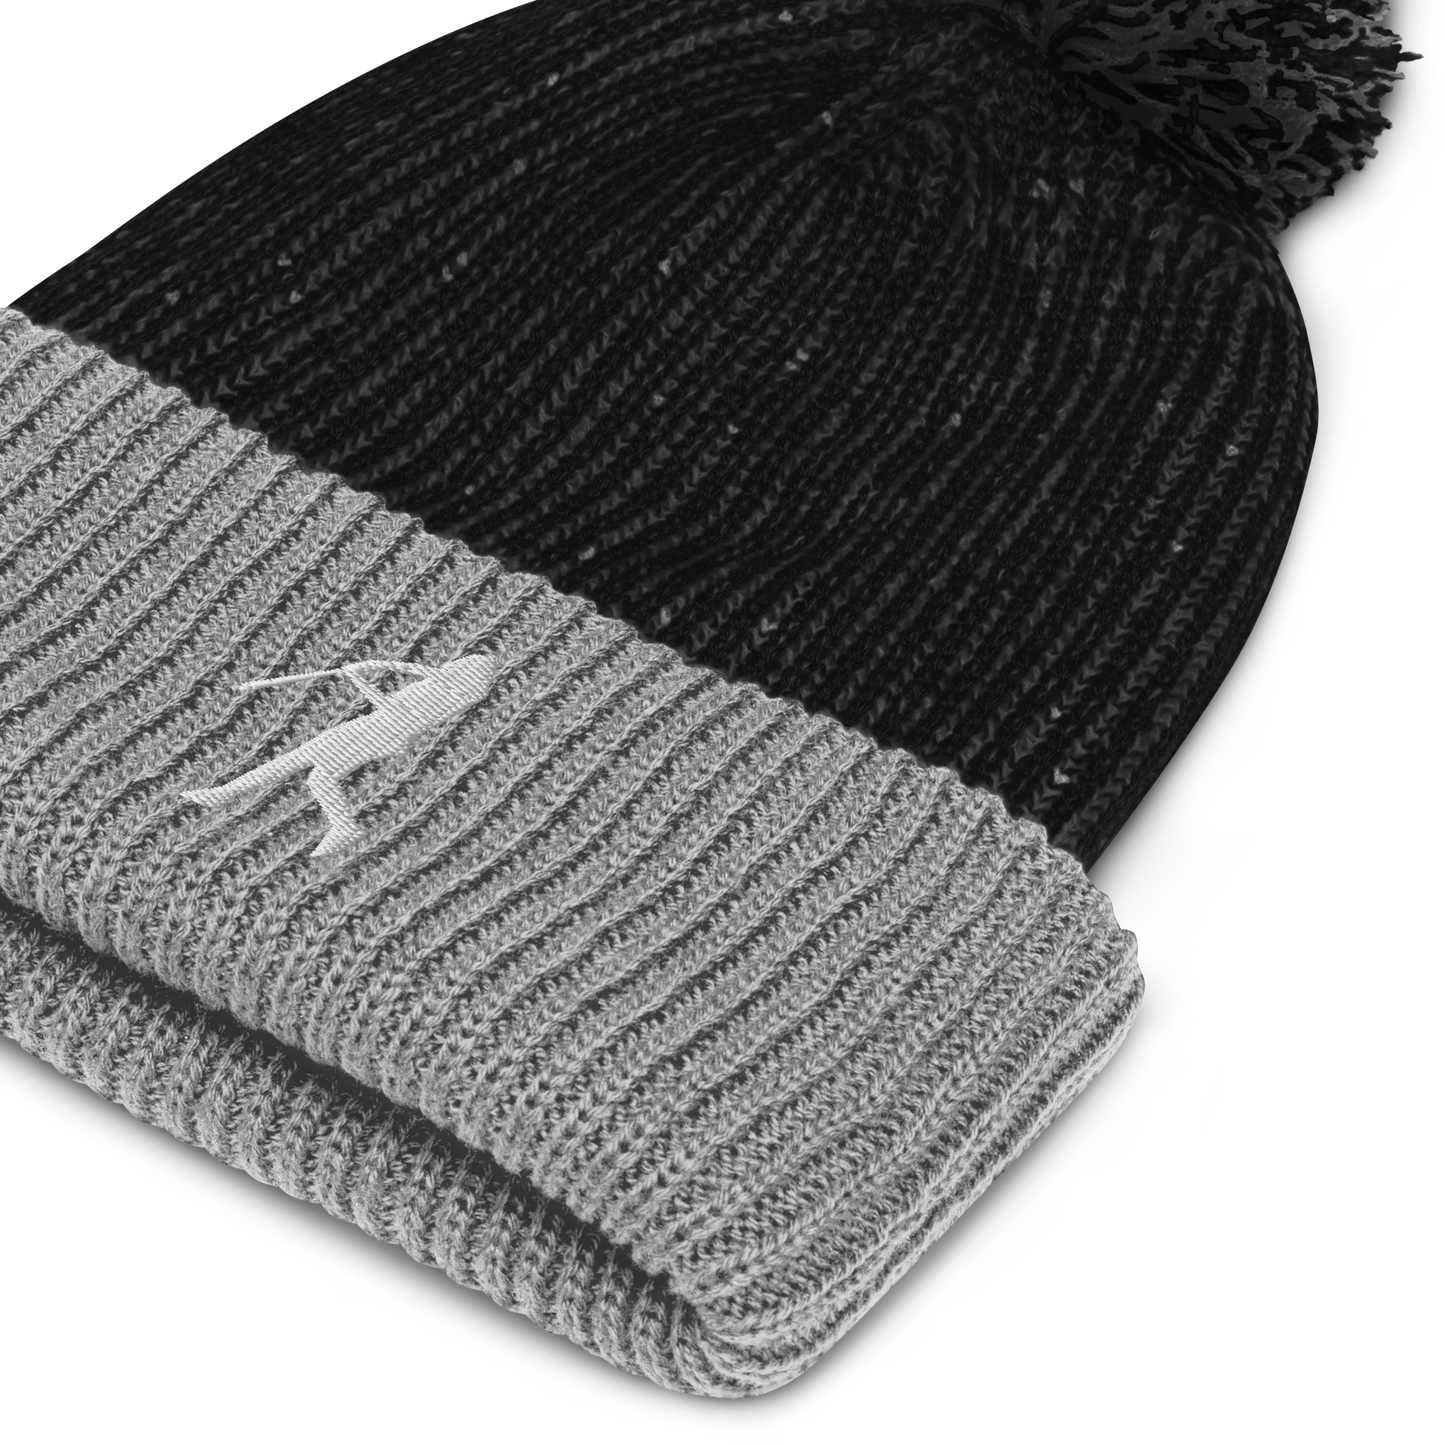 Two Color "The .394 Swing" Pom Pom Beanie Hat